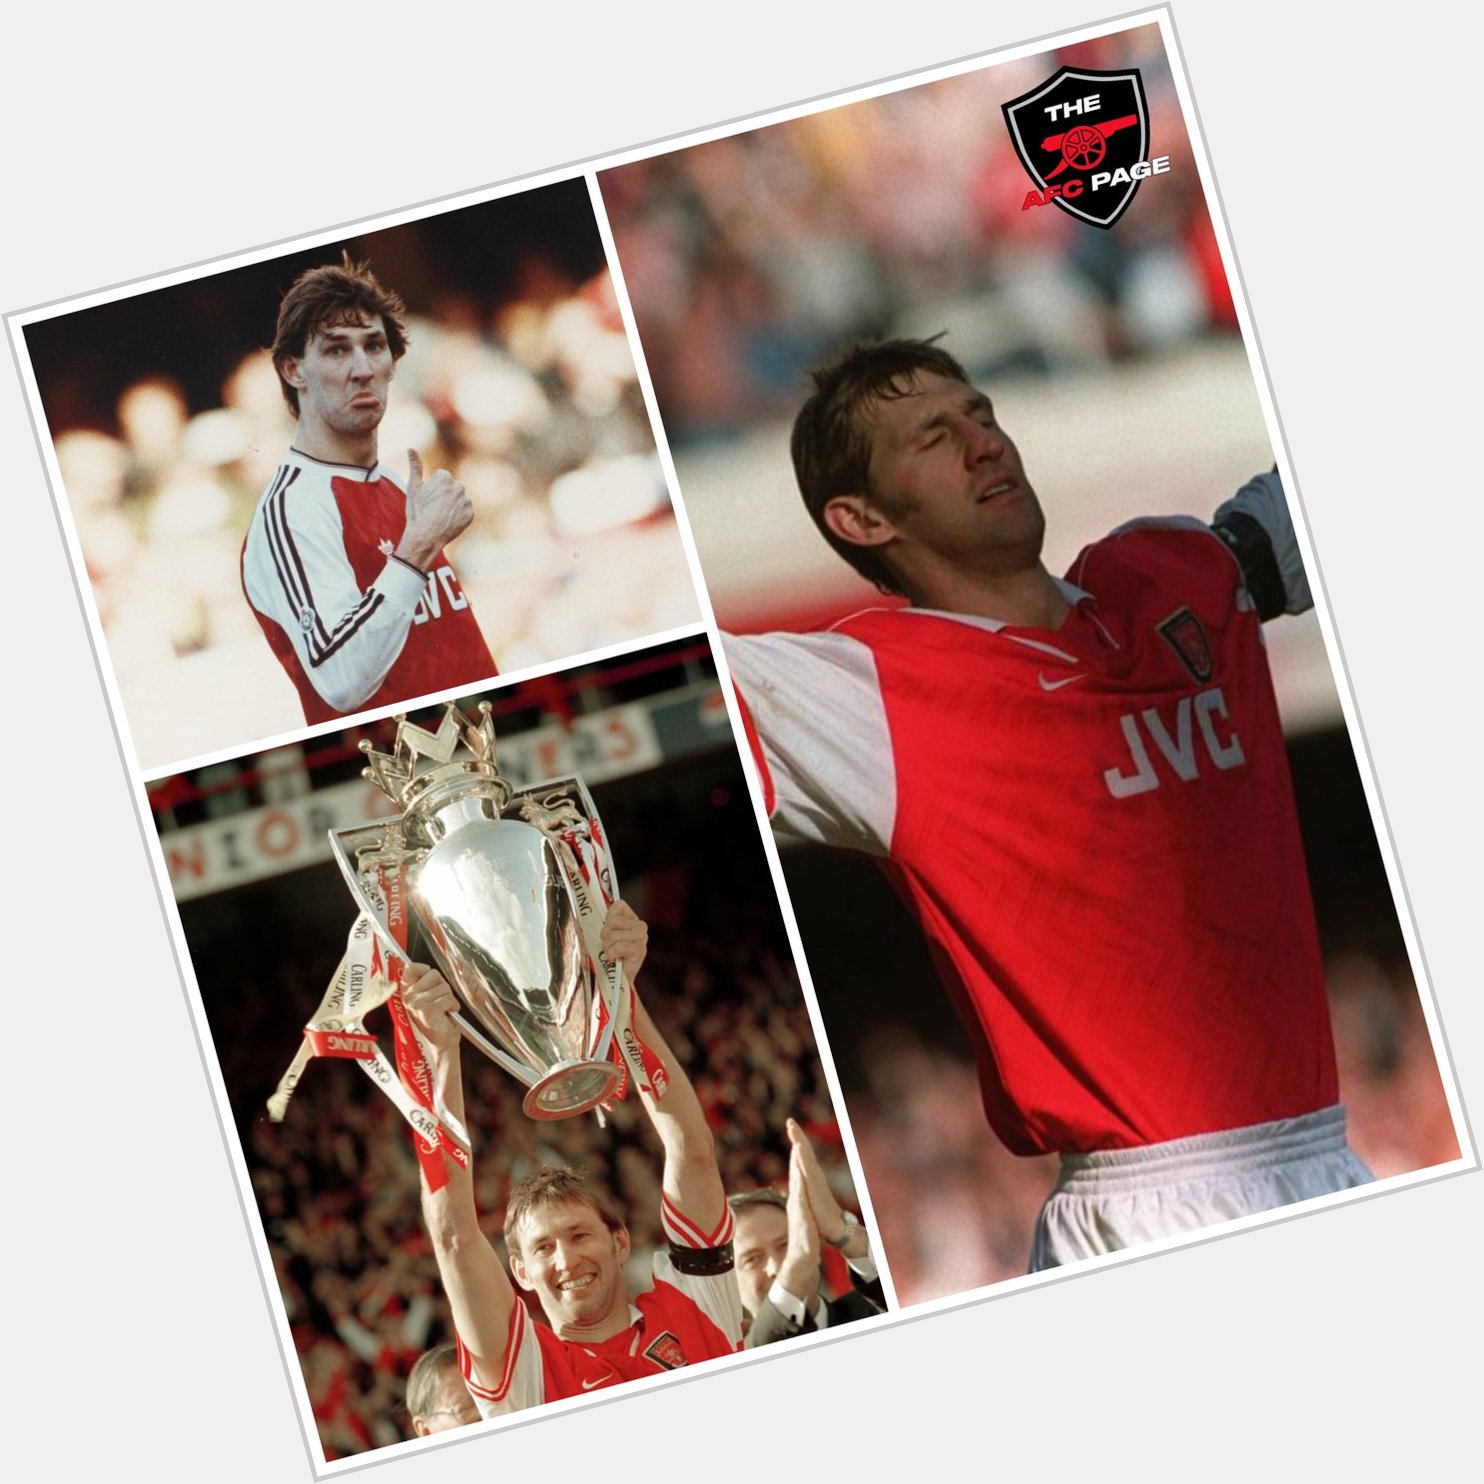 Happy birthday to the great Tony Adams.

One of the greatest captains in football history 